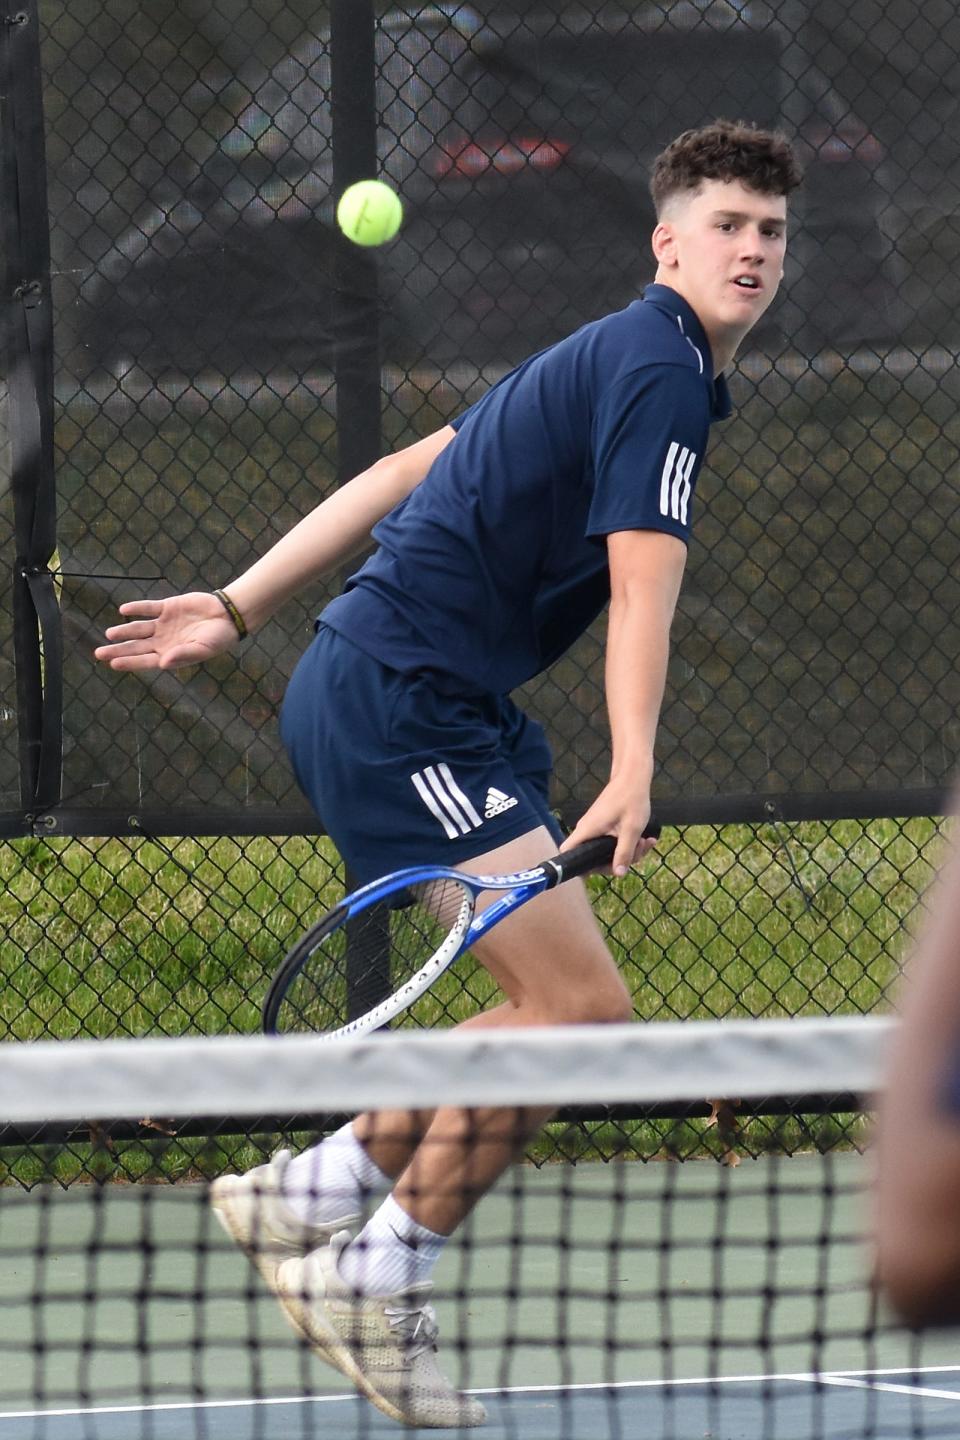 Somerset Berkley second doubles player Ian Sullivan backhands a shot over the net in Thursday's match against Seekonk at Chapman Courts in Somerset.